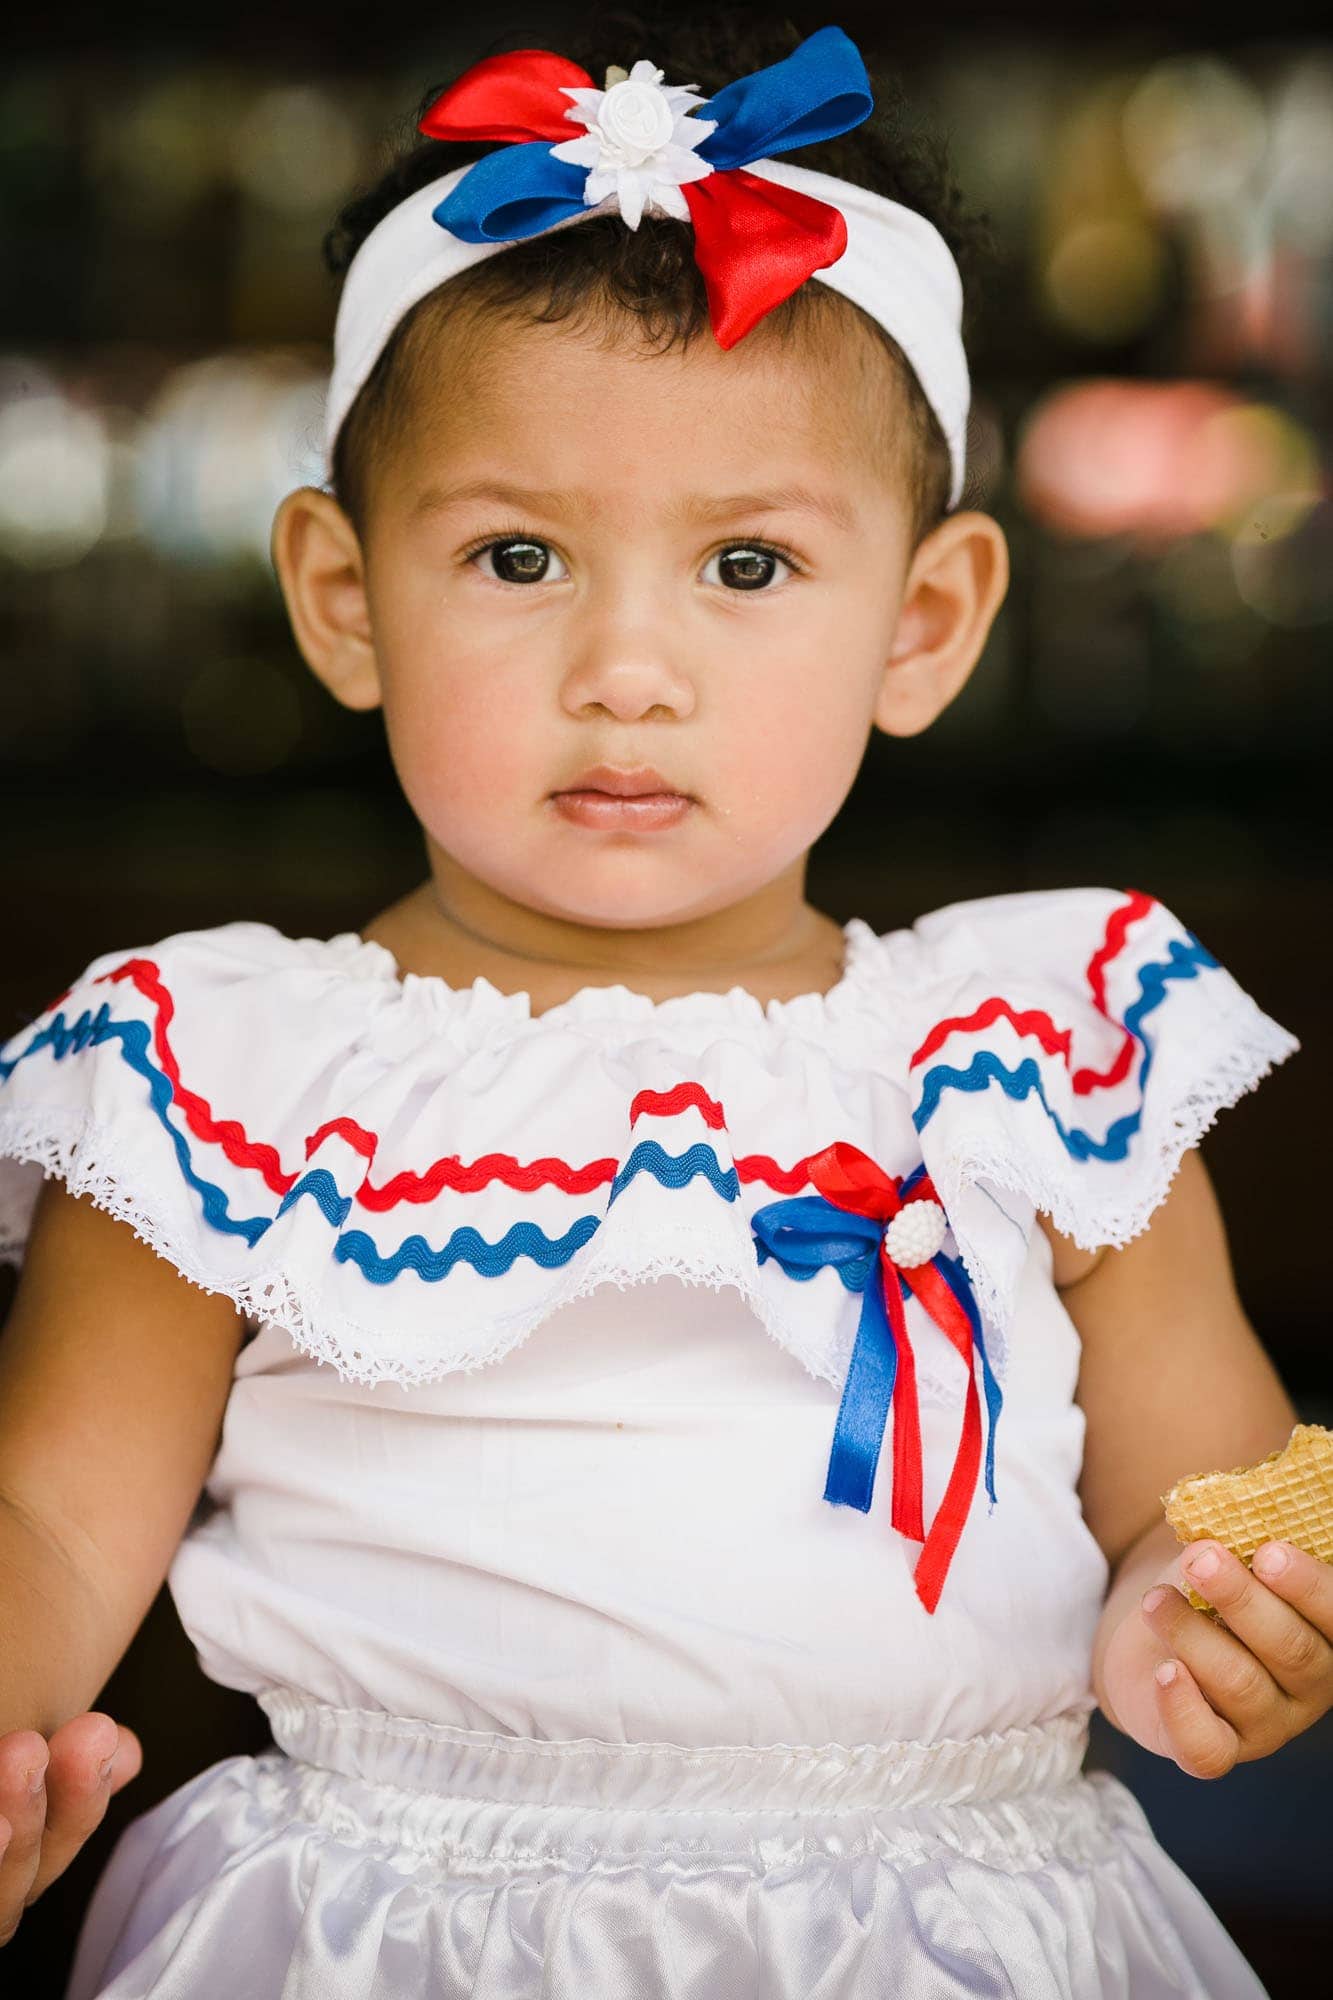 Little girl in campesino outfit (traditional Costa Rican clothing)